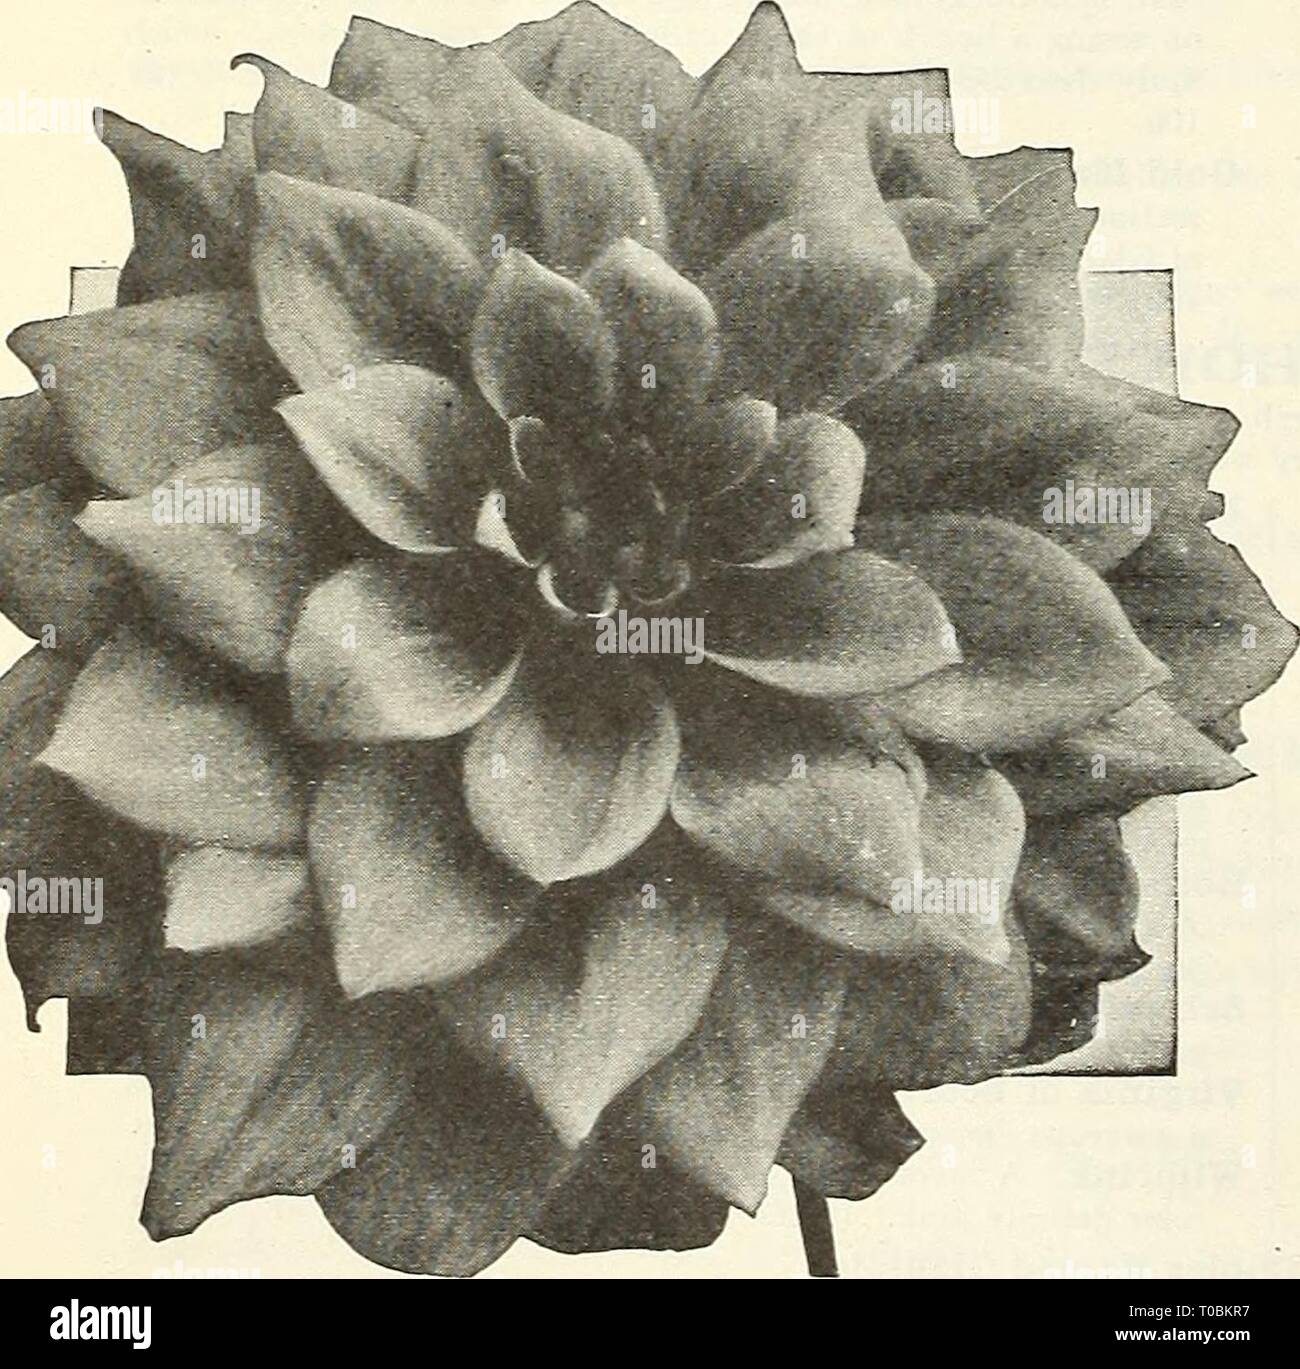 Dreer's garden book 1928 (1928) Dreer's garden book 1928 dreersgardenbook1928henr Year: 1928  Peony Dahlia Geisha    Decorative Dahlia Granada George Aeugle (Decorative). A tall vigorous grower with im- mense full deep flowers of a rich wax yellow suffused on the reverse with dragon's blood red. A splendid exhibition flower with good stems. Plants, $2.00 each. Granada (Decorative). One of Mr Broomall's introductions, a Very large, broad Detailed clear lemon yellow on good stiff stems. Plants, $5.00 each. Hera (Decorative). A Holland introduction that came to us high- ly recommended, which has  Stock Photo